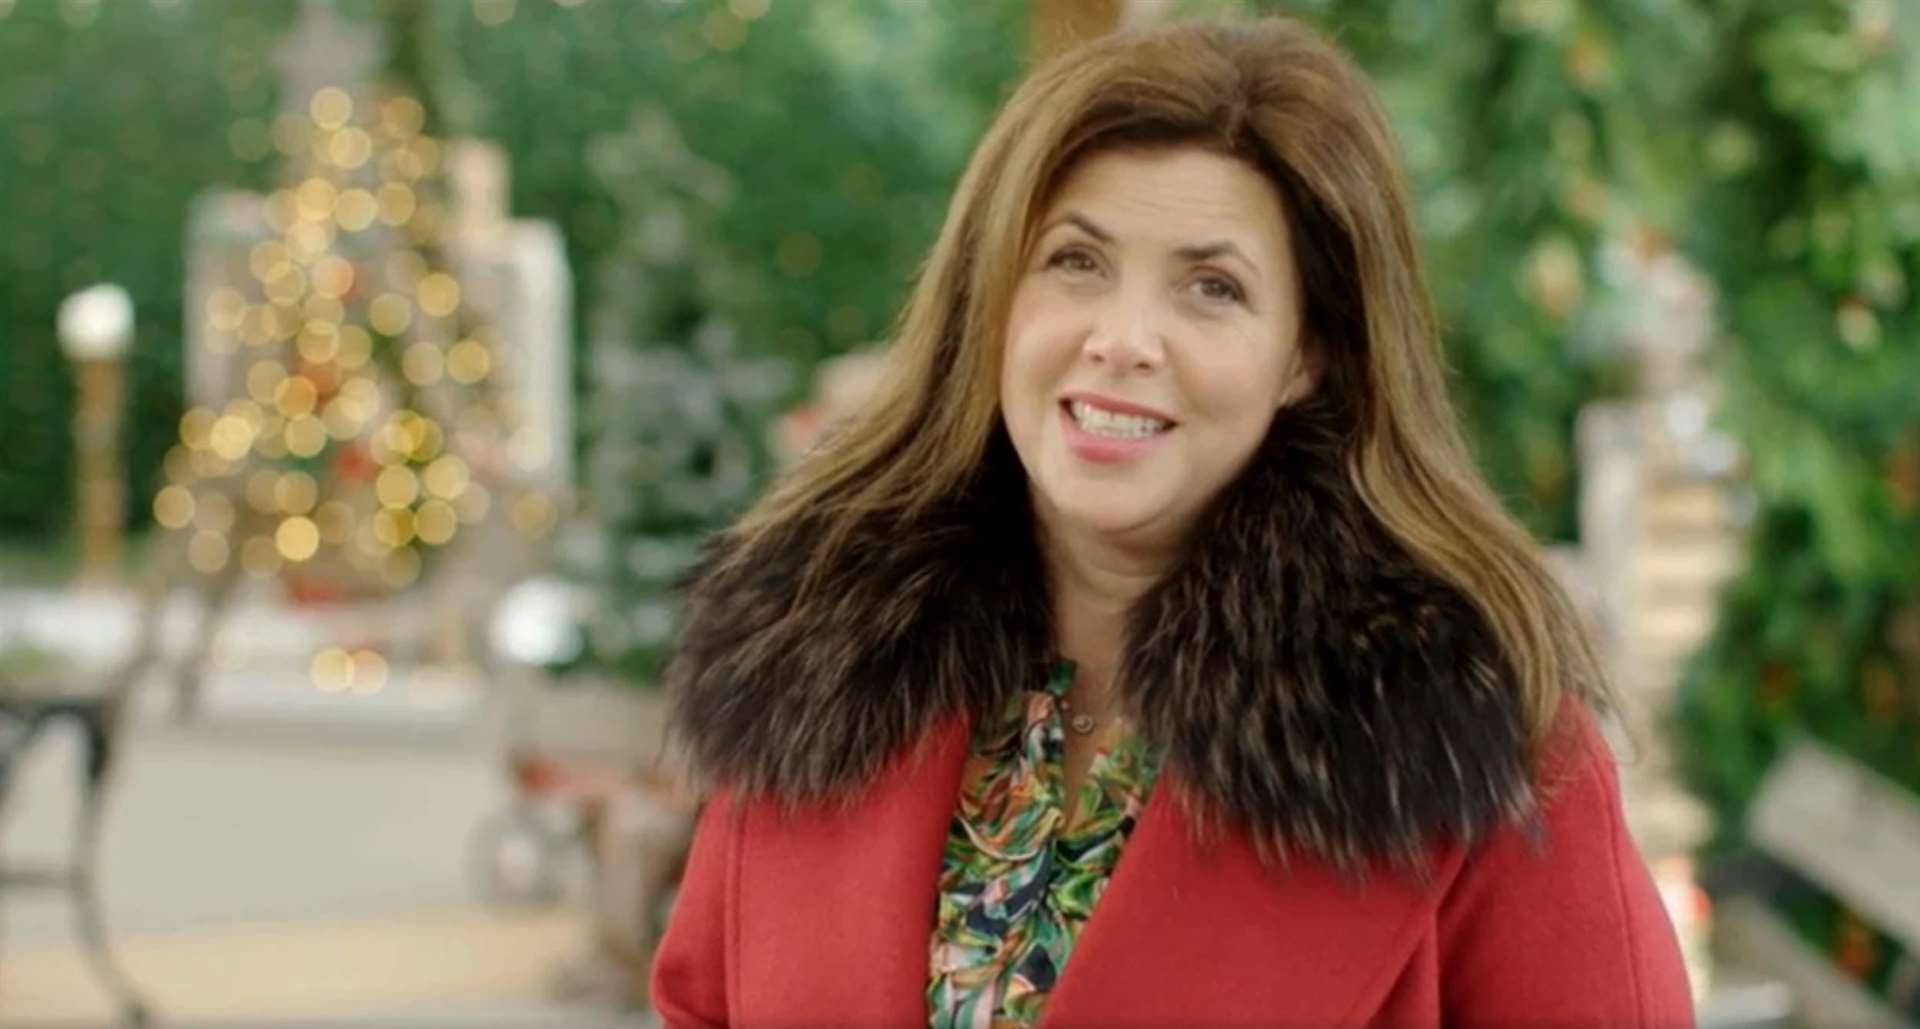 Kirstie Allsopp presents Kirstie's Handmade Christmas on Channel 4. Picture: 2020 / Raise The Roof Productions